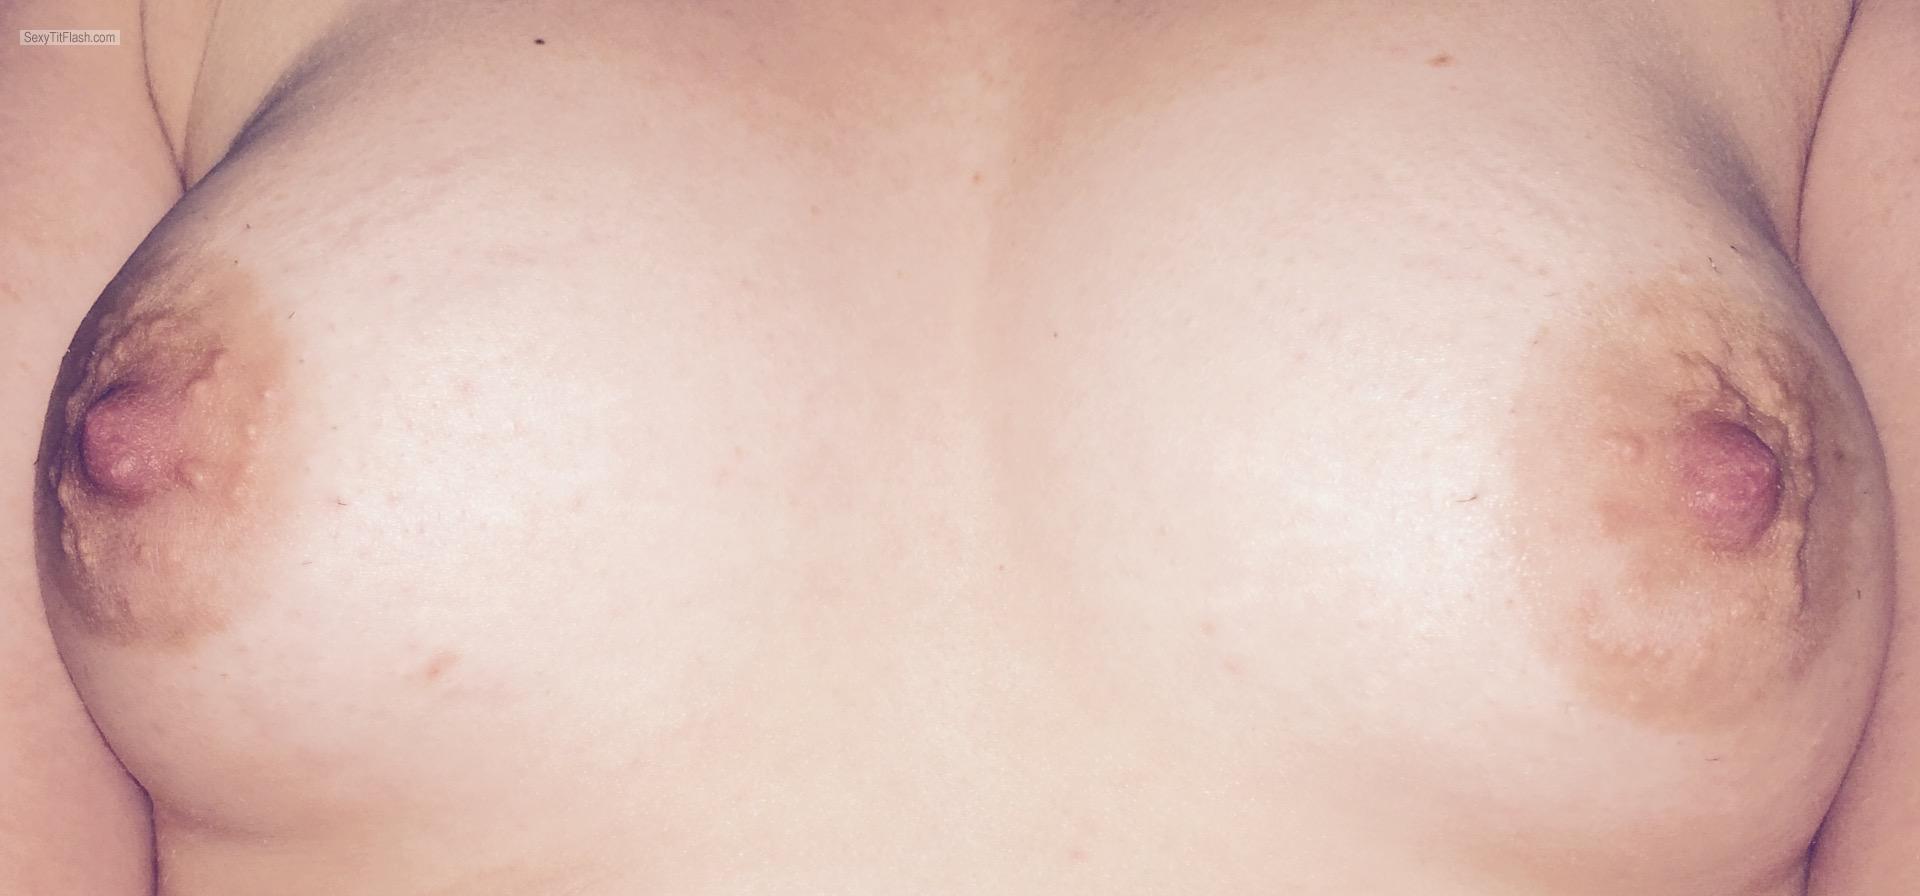 My Small Tits Selfie by Smallperky